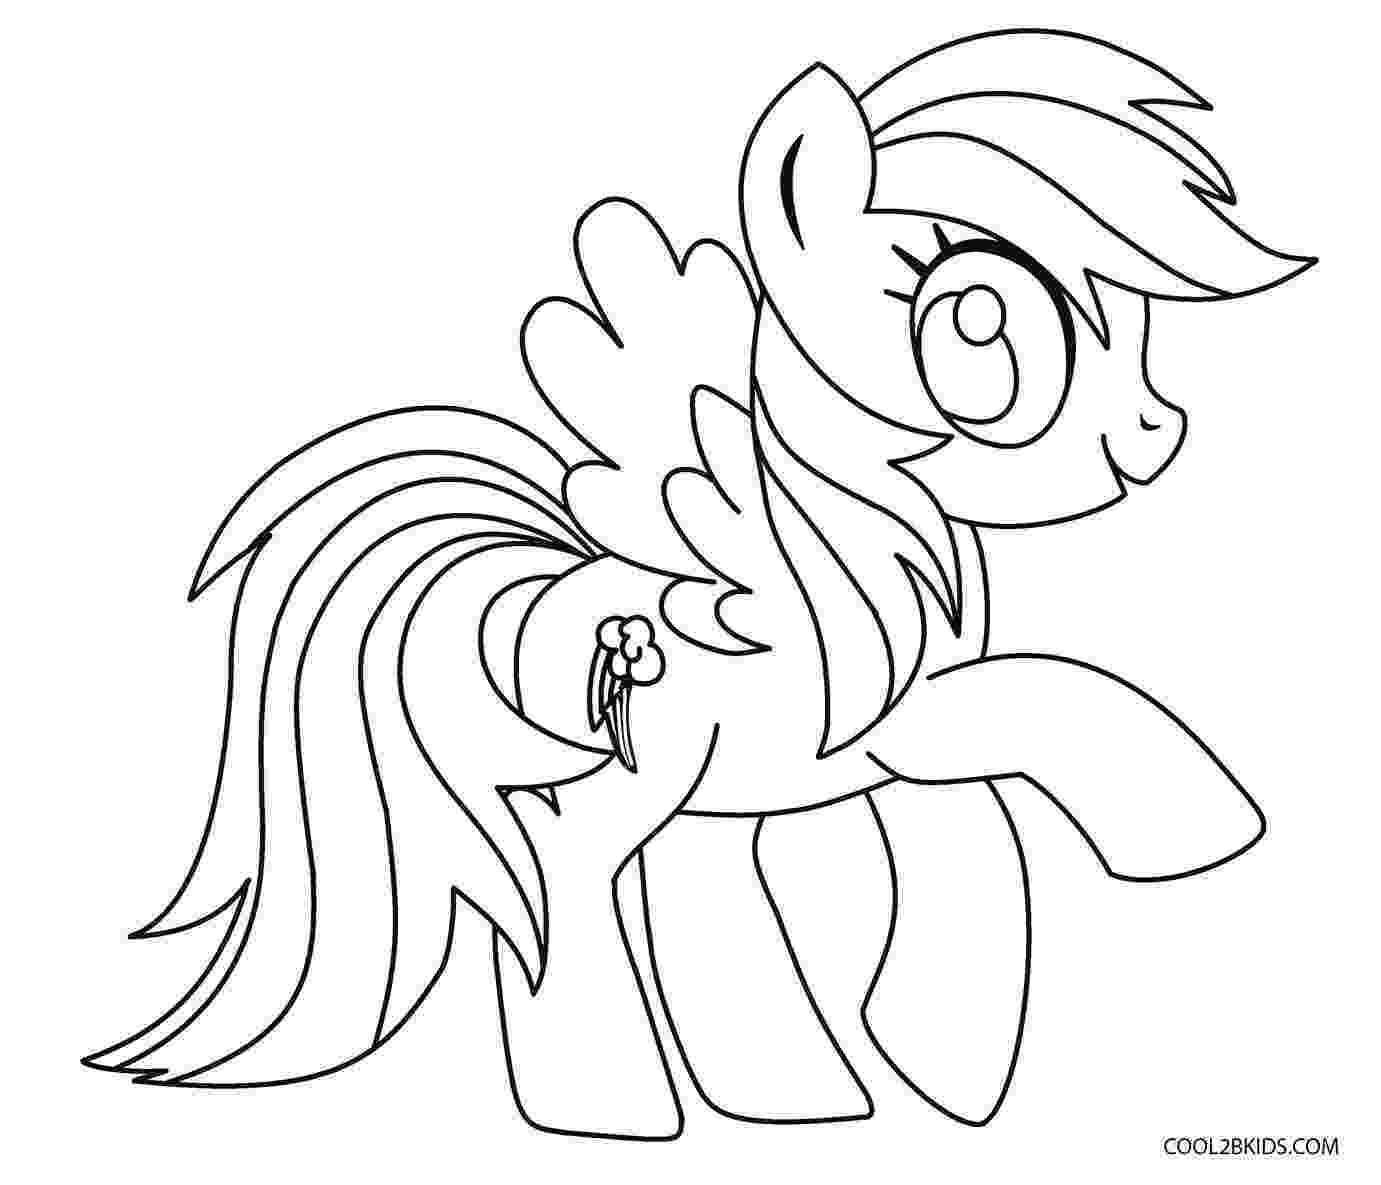 rainbow dash coloring sheets free printable my little pony coloring pages for kids dash rainbow sheets coloring 